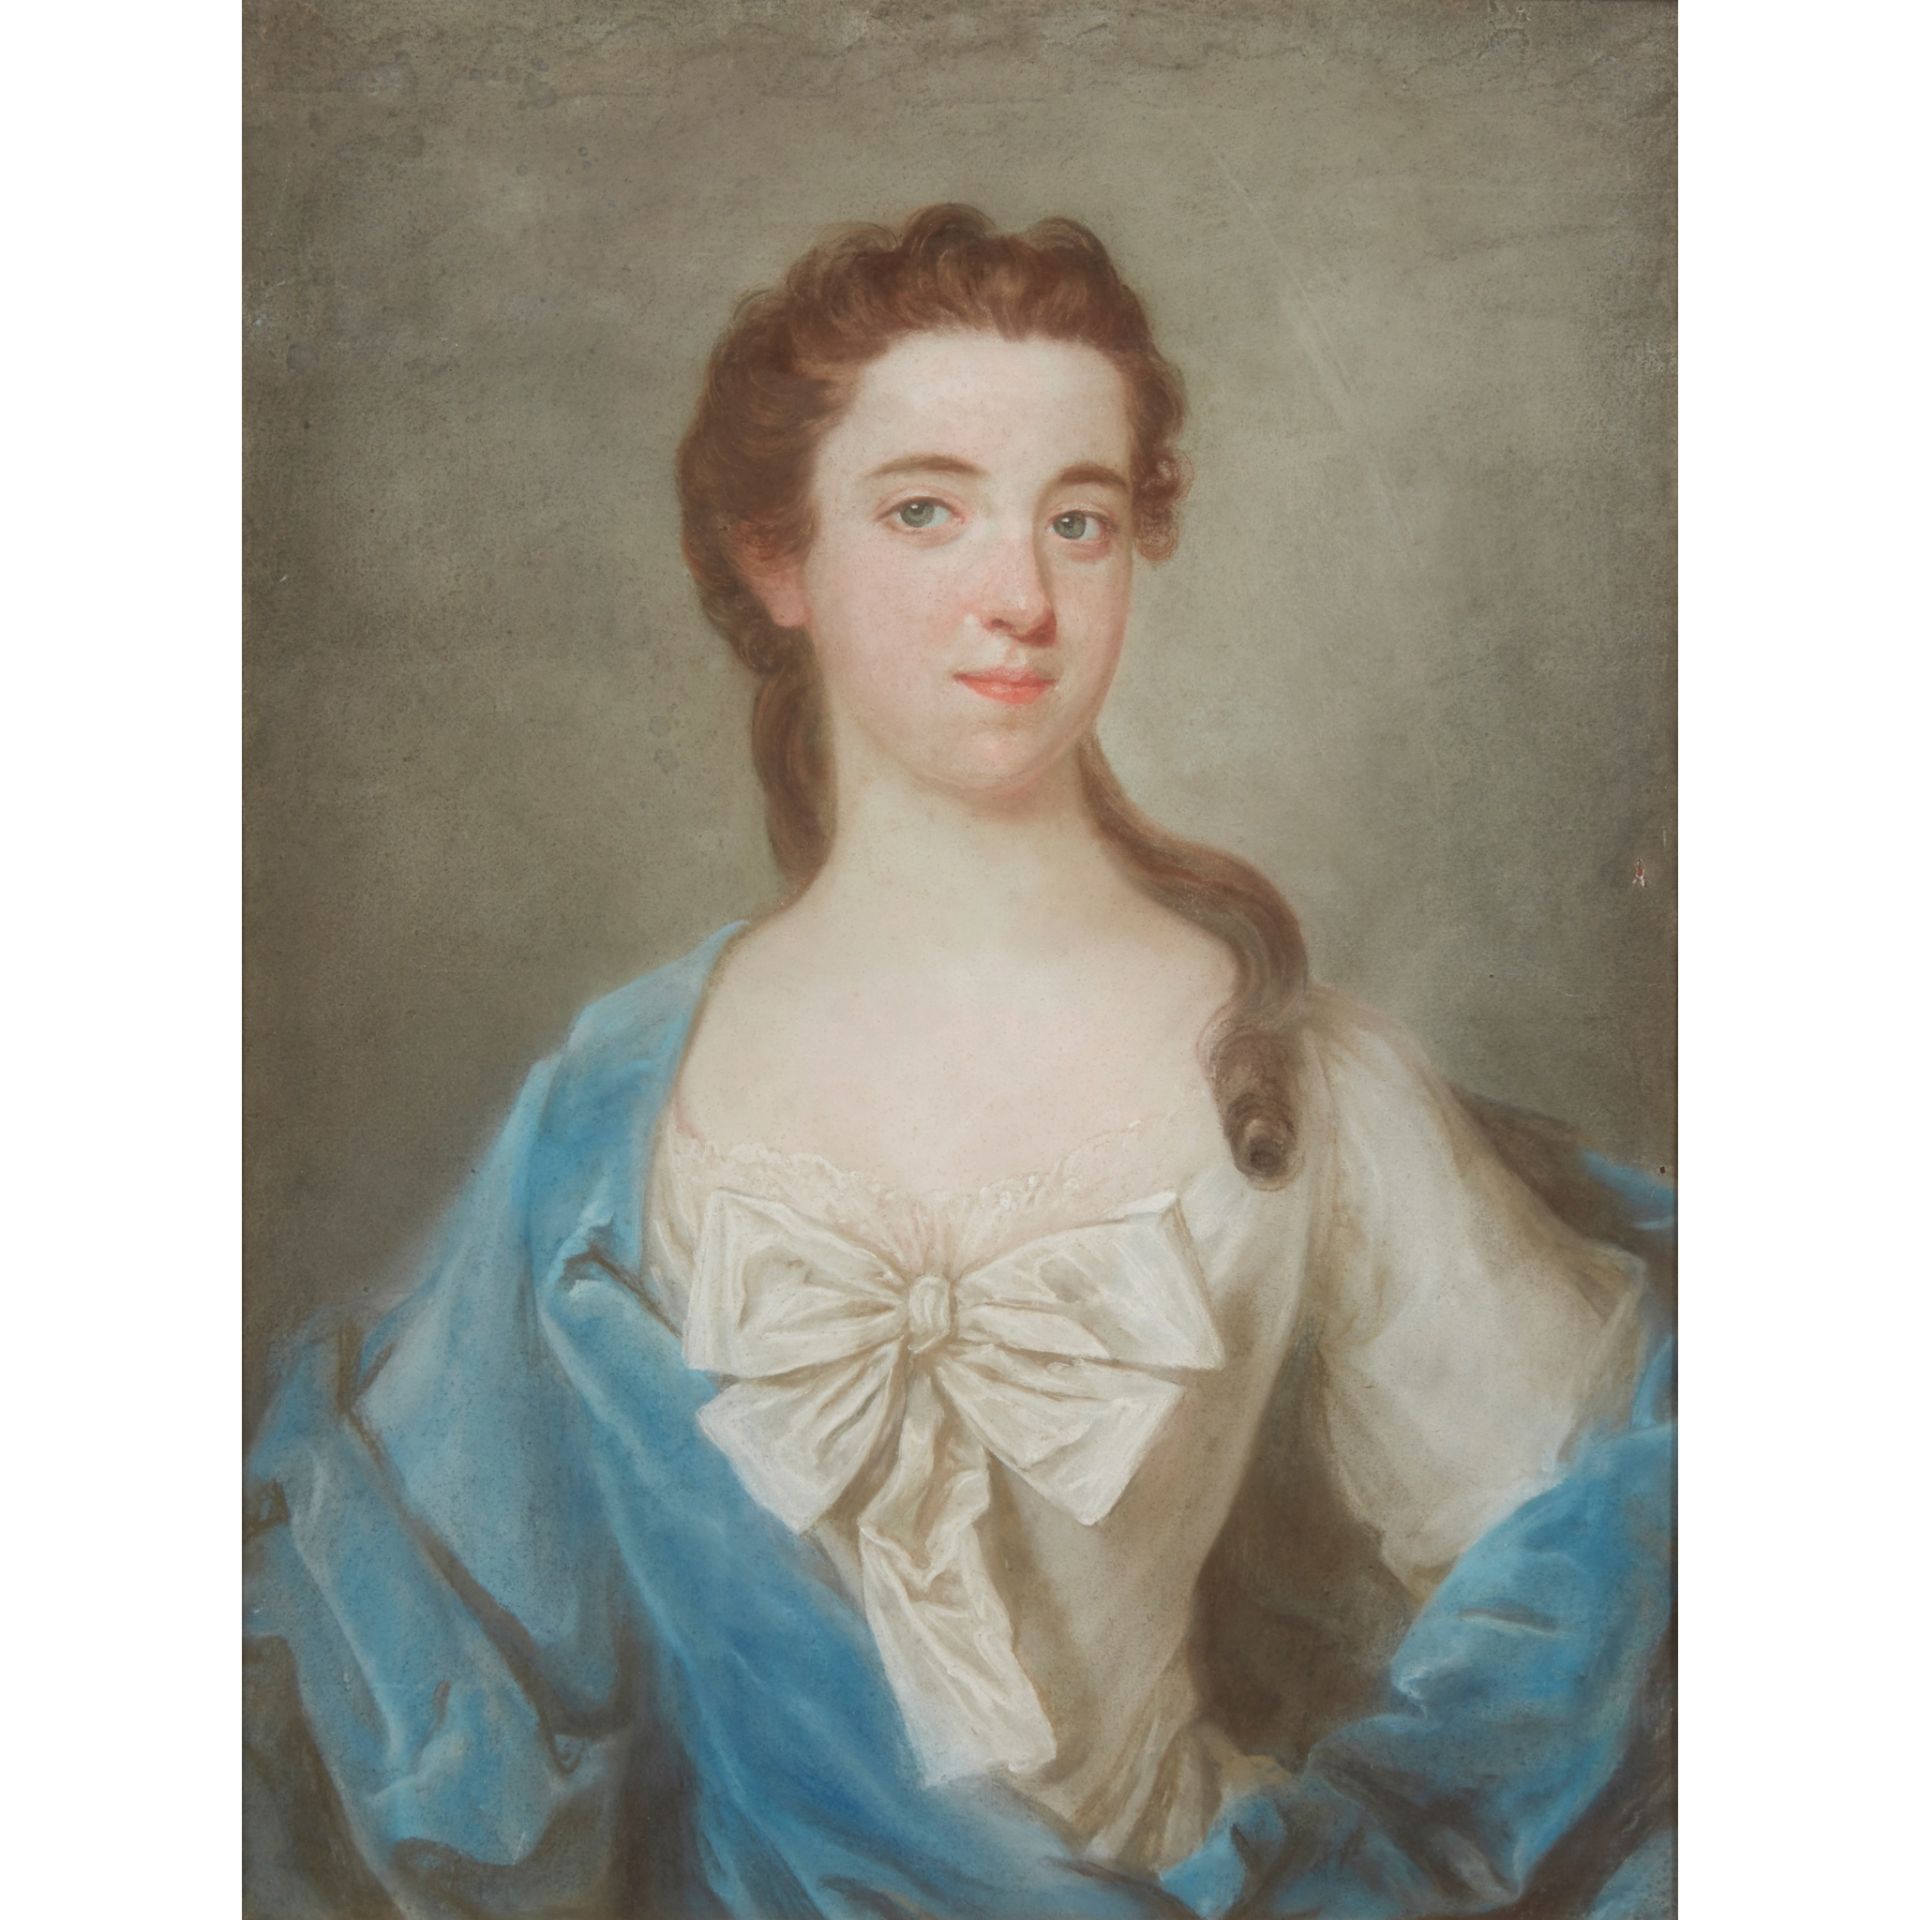 18TH CENTURY ENGLISH SCHOOL HALF LENGTH PORTRAIT OF A YOUNG LADY IN A WHITE DRESS WITH BLUE WRAP